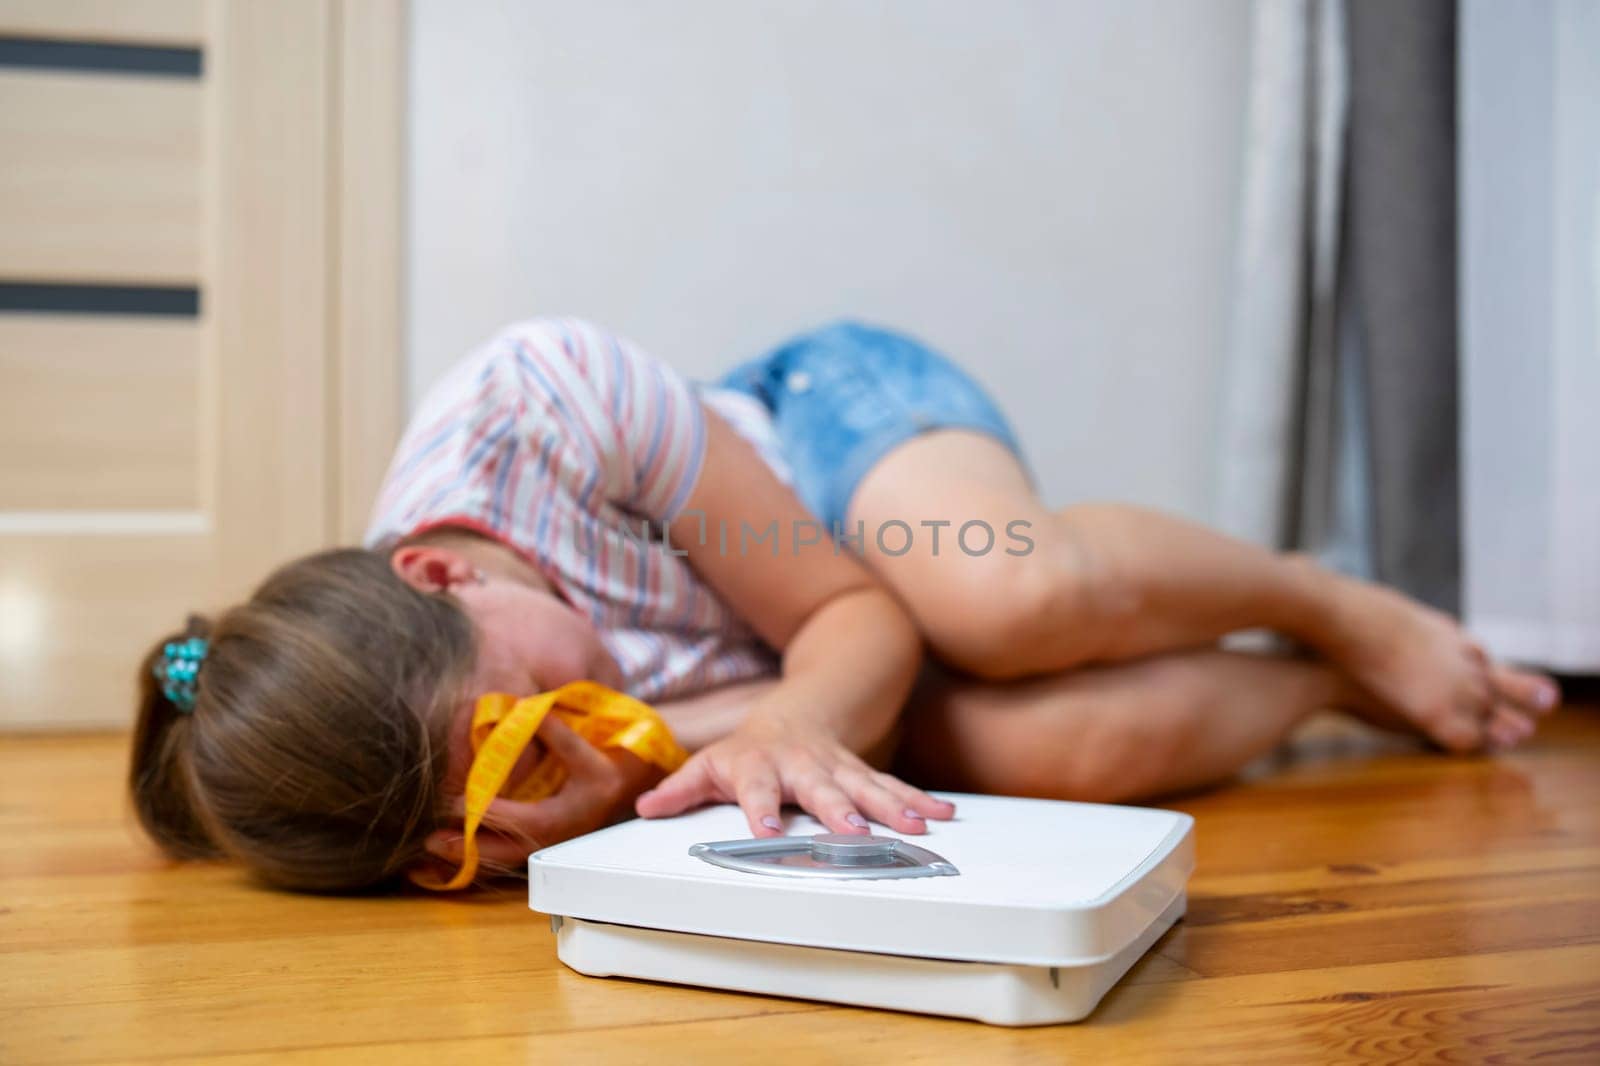 Distressed girl lying on the floor next to a weighing scale and measuring tape by andreyz